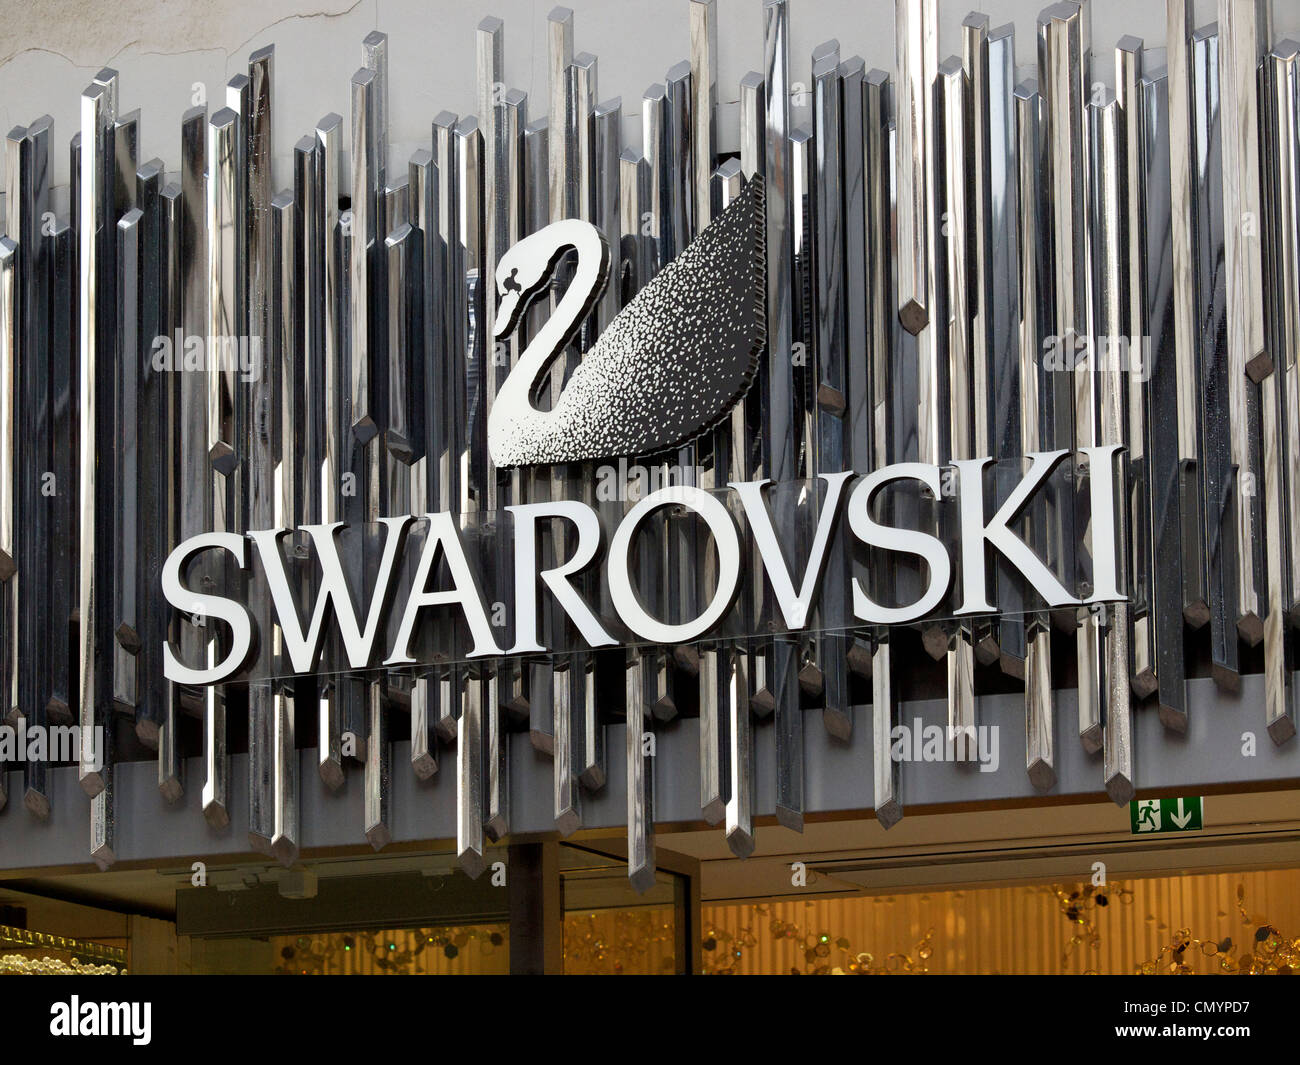 Swarovski sign with swan logo on shop in Brussels, Belgium Stock Photo -  Alamy